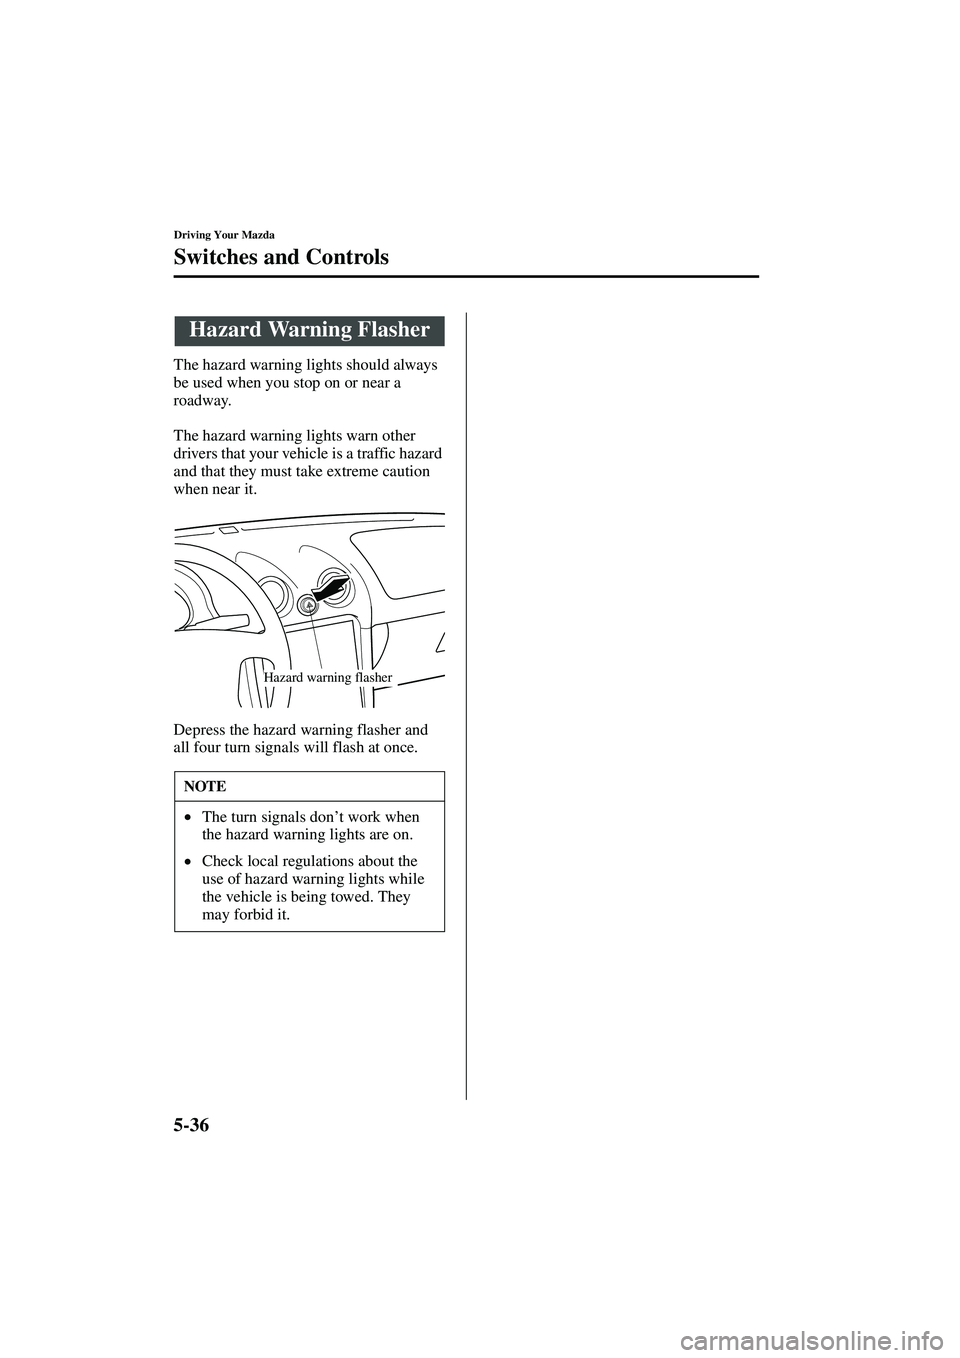 MAZDA MODEL MX-5 MIATA 2004  Owners Manual 5-36
Driving Your Mazda
Switches and Controls
Form No. 8S15-EA-03G
The hazard warning lights should always 
be used when you stop on or near a 
roadway.
The hazard warning lights warn other 
drivers t